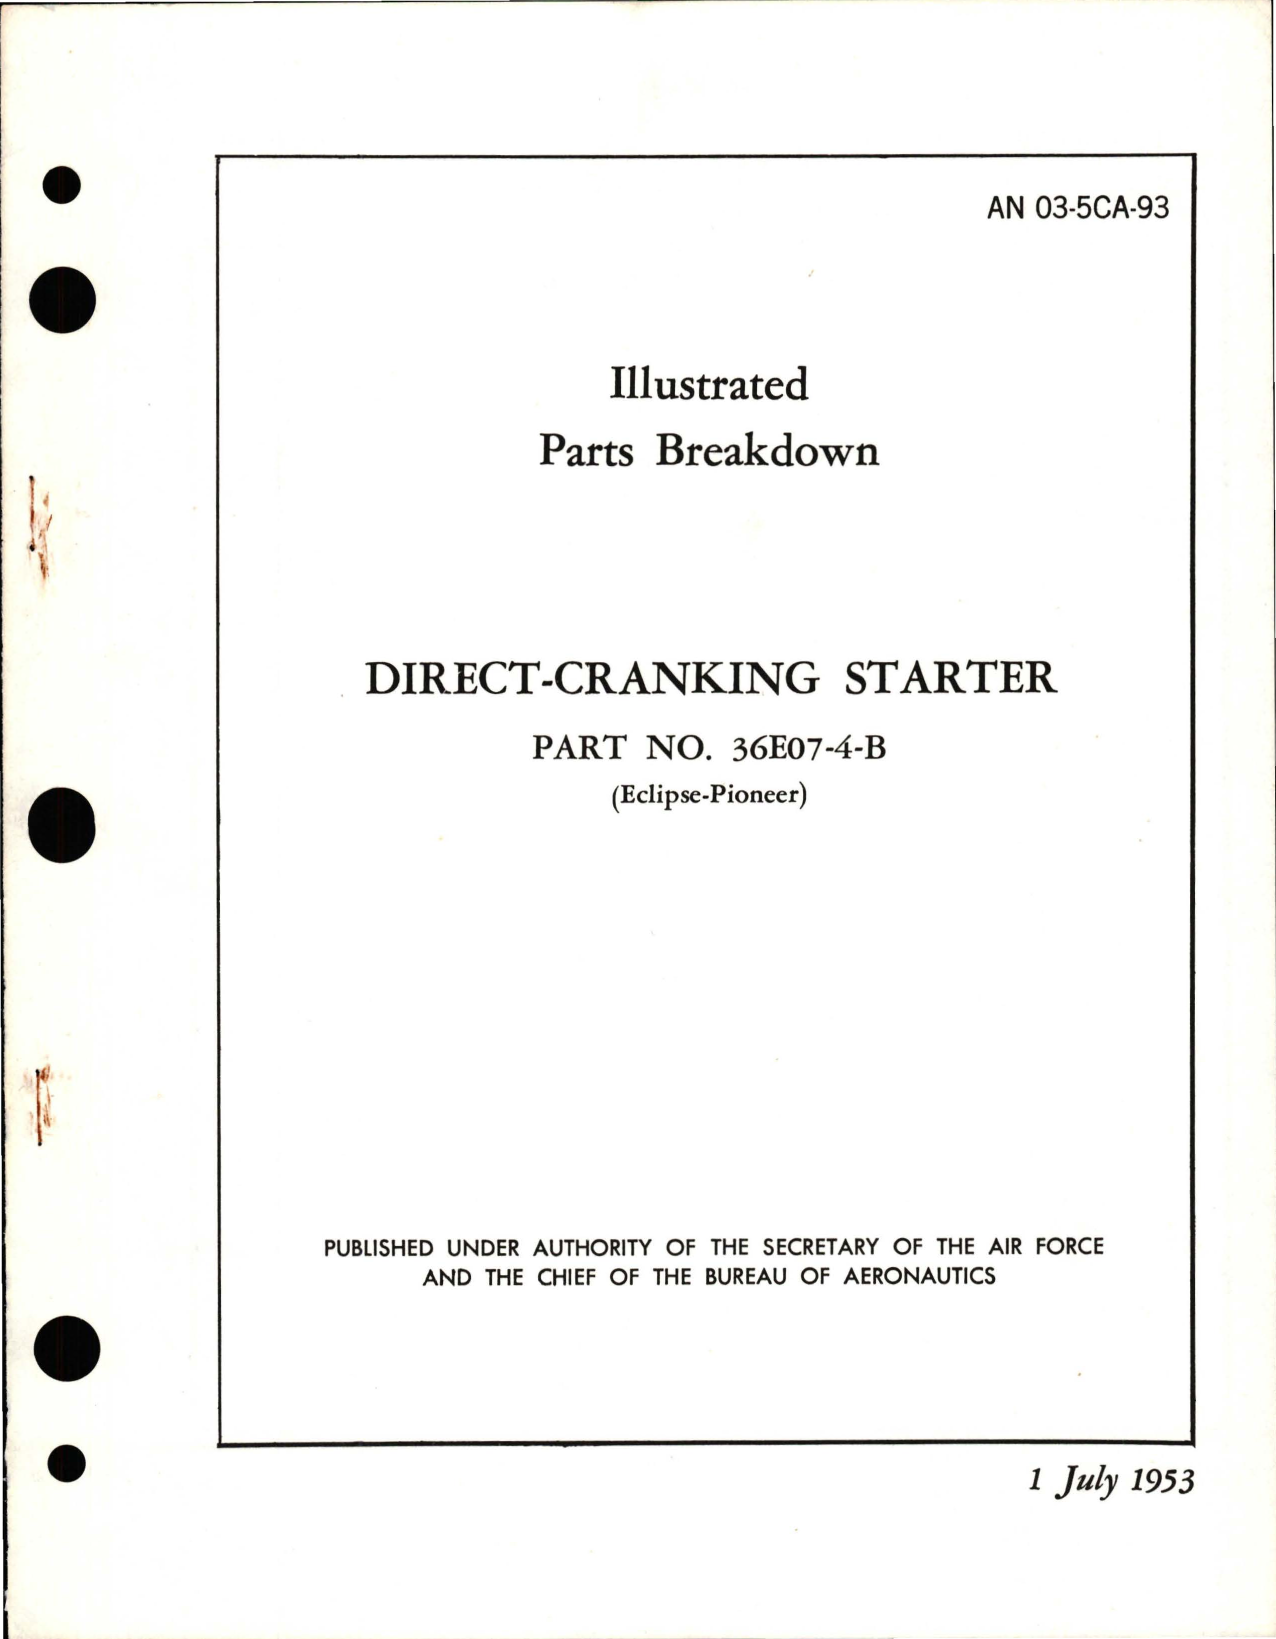 Sample page 1 from AirCorps Library document: Illustrated Parts Breakdown for Direct-Cranking Starter - Part 36E07-4-B